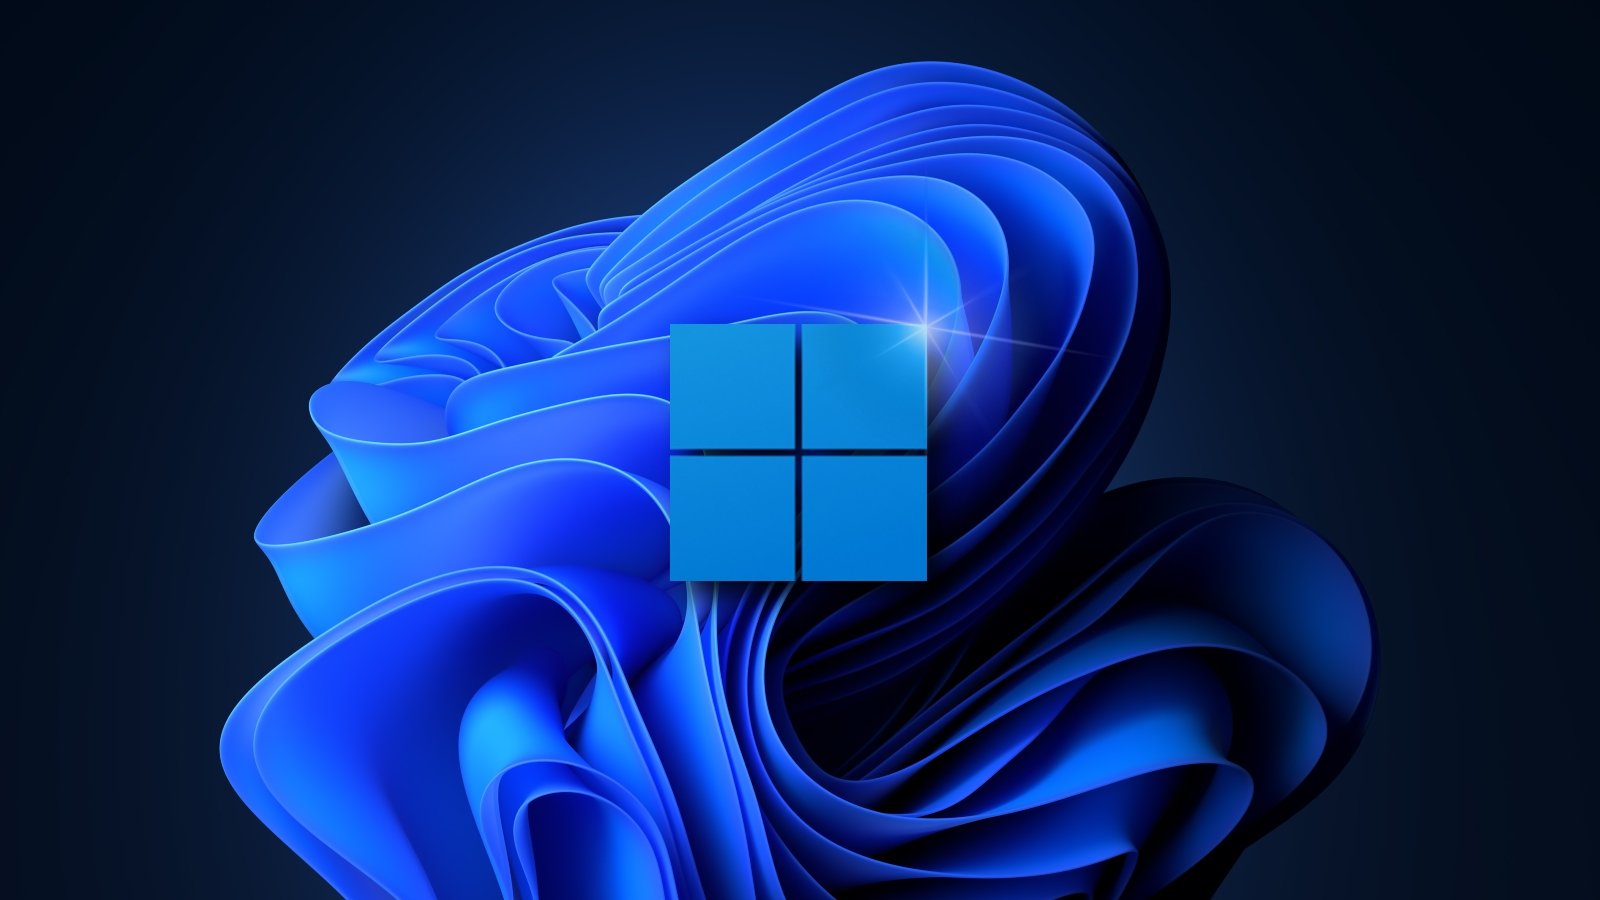 The known Windows 11 issues and how you can fix them